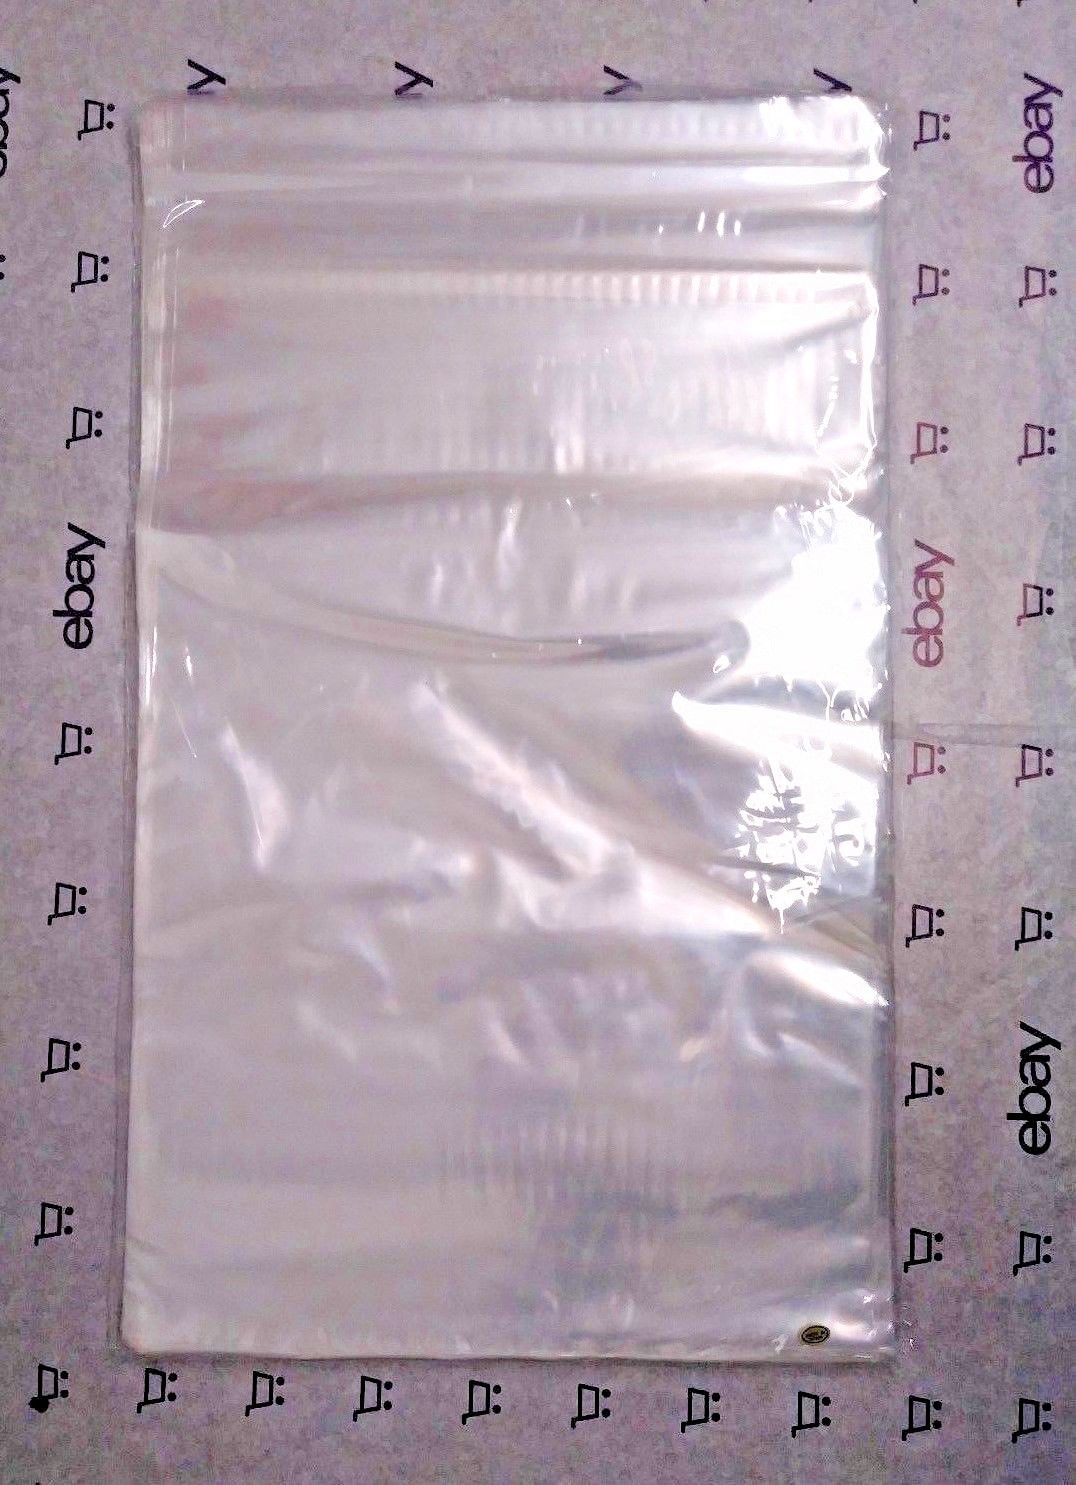 Carry Bags, Printed Carry Bags, Premium Carry Bags, Paper Carry Bag, Carry  Bag Manufacturer,